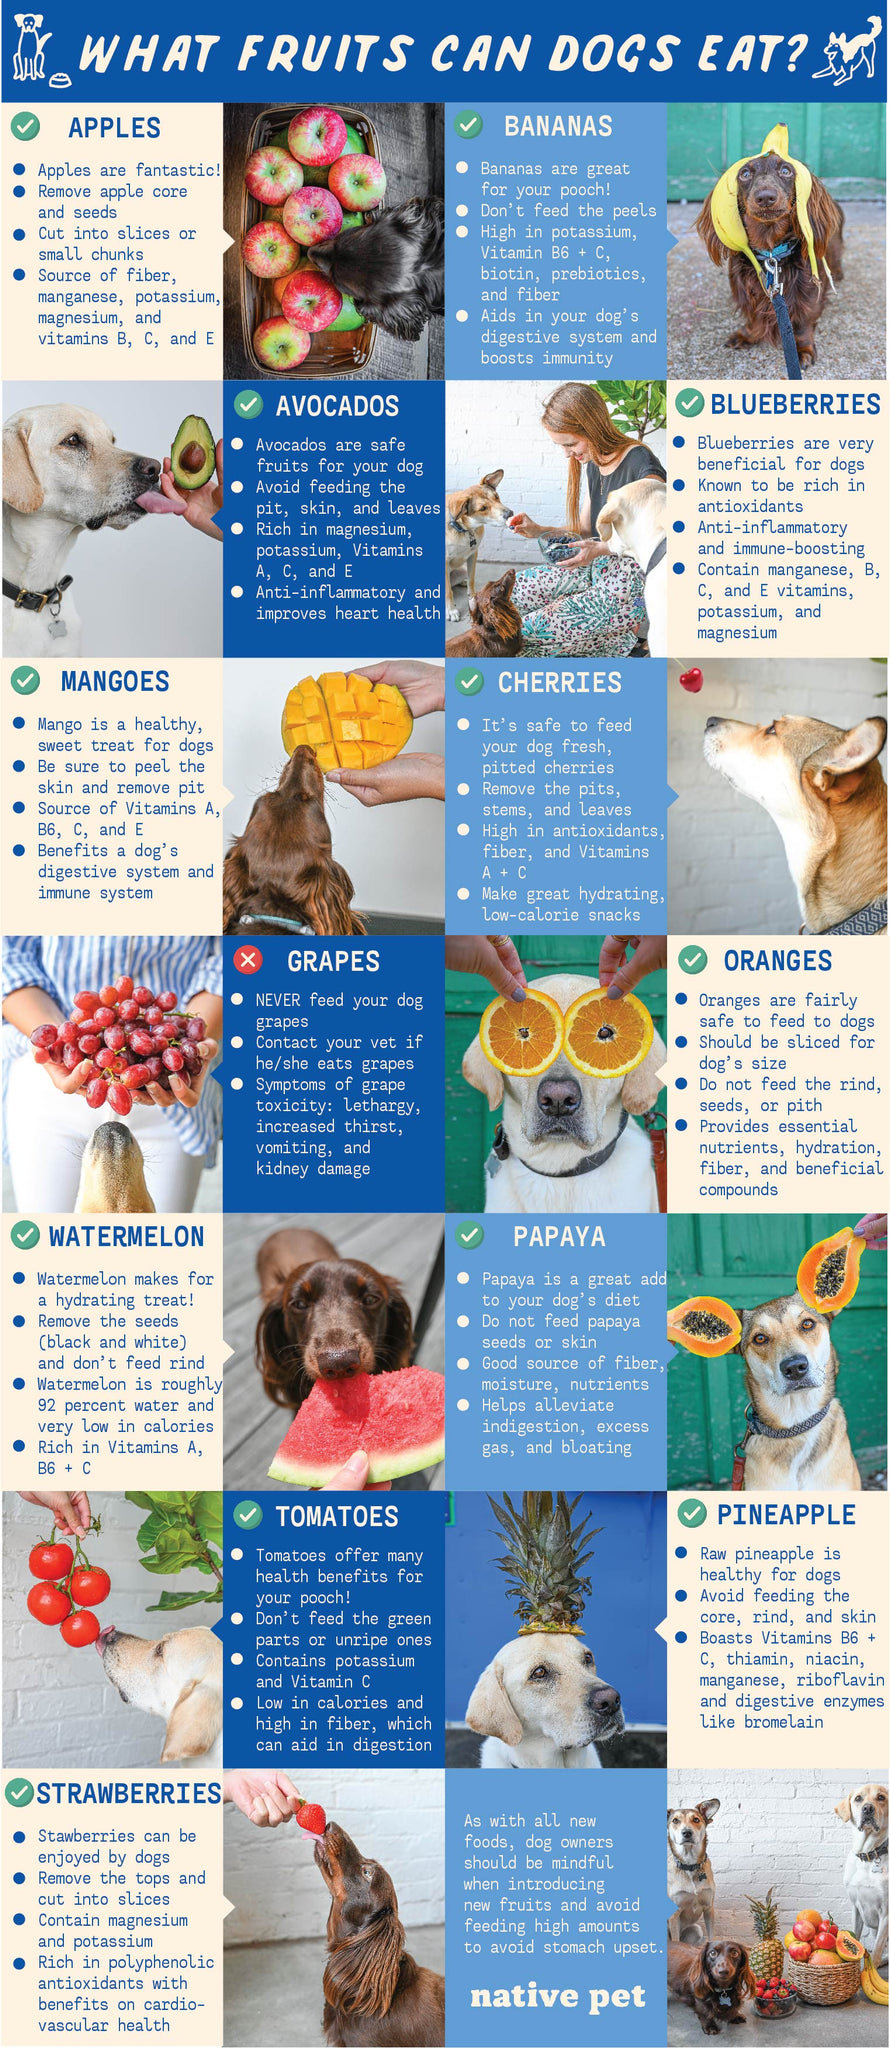 Are apples safe for your dog